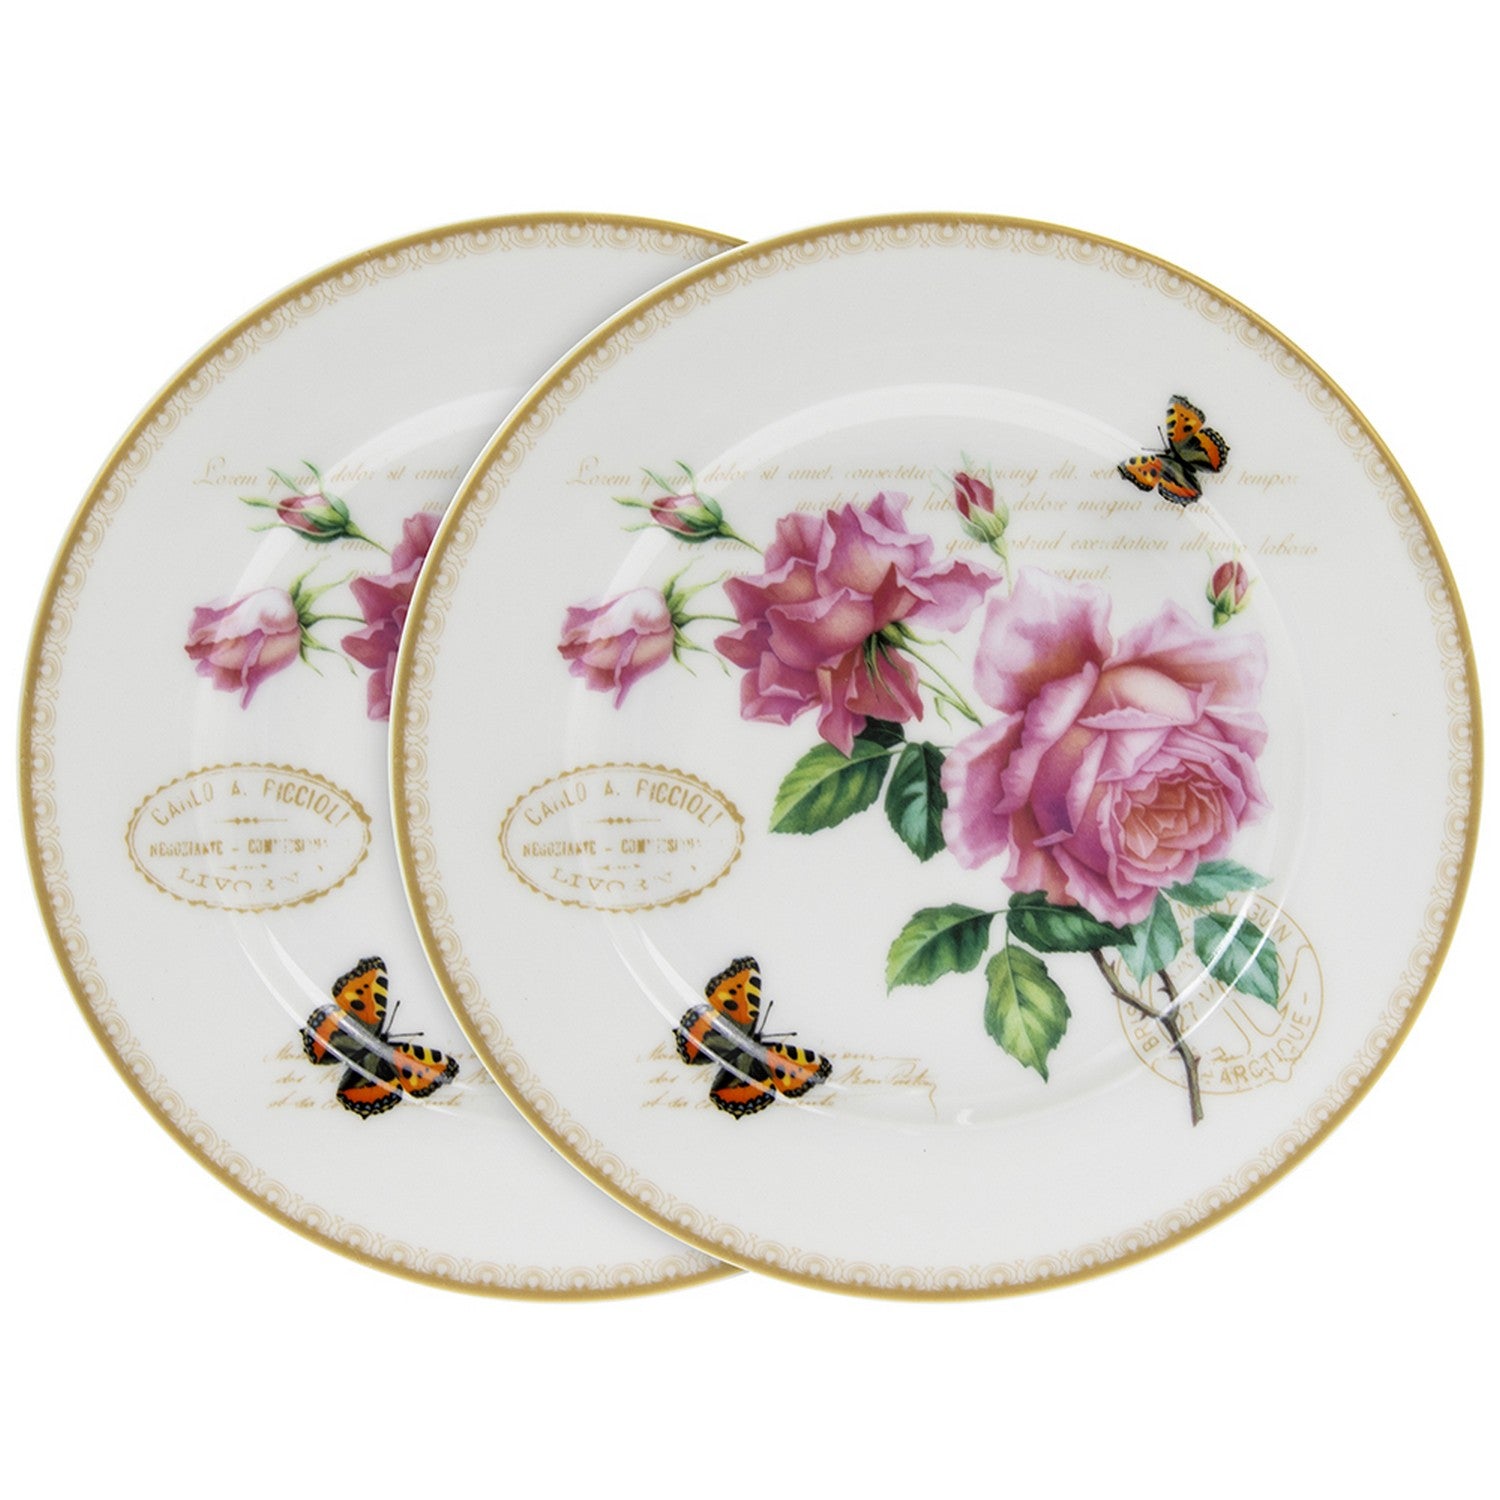 Redoute Rose Plates Set of 2